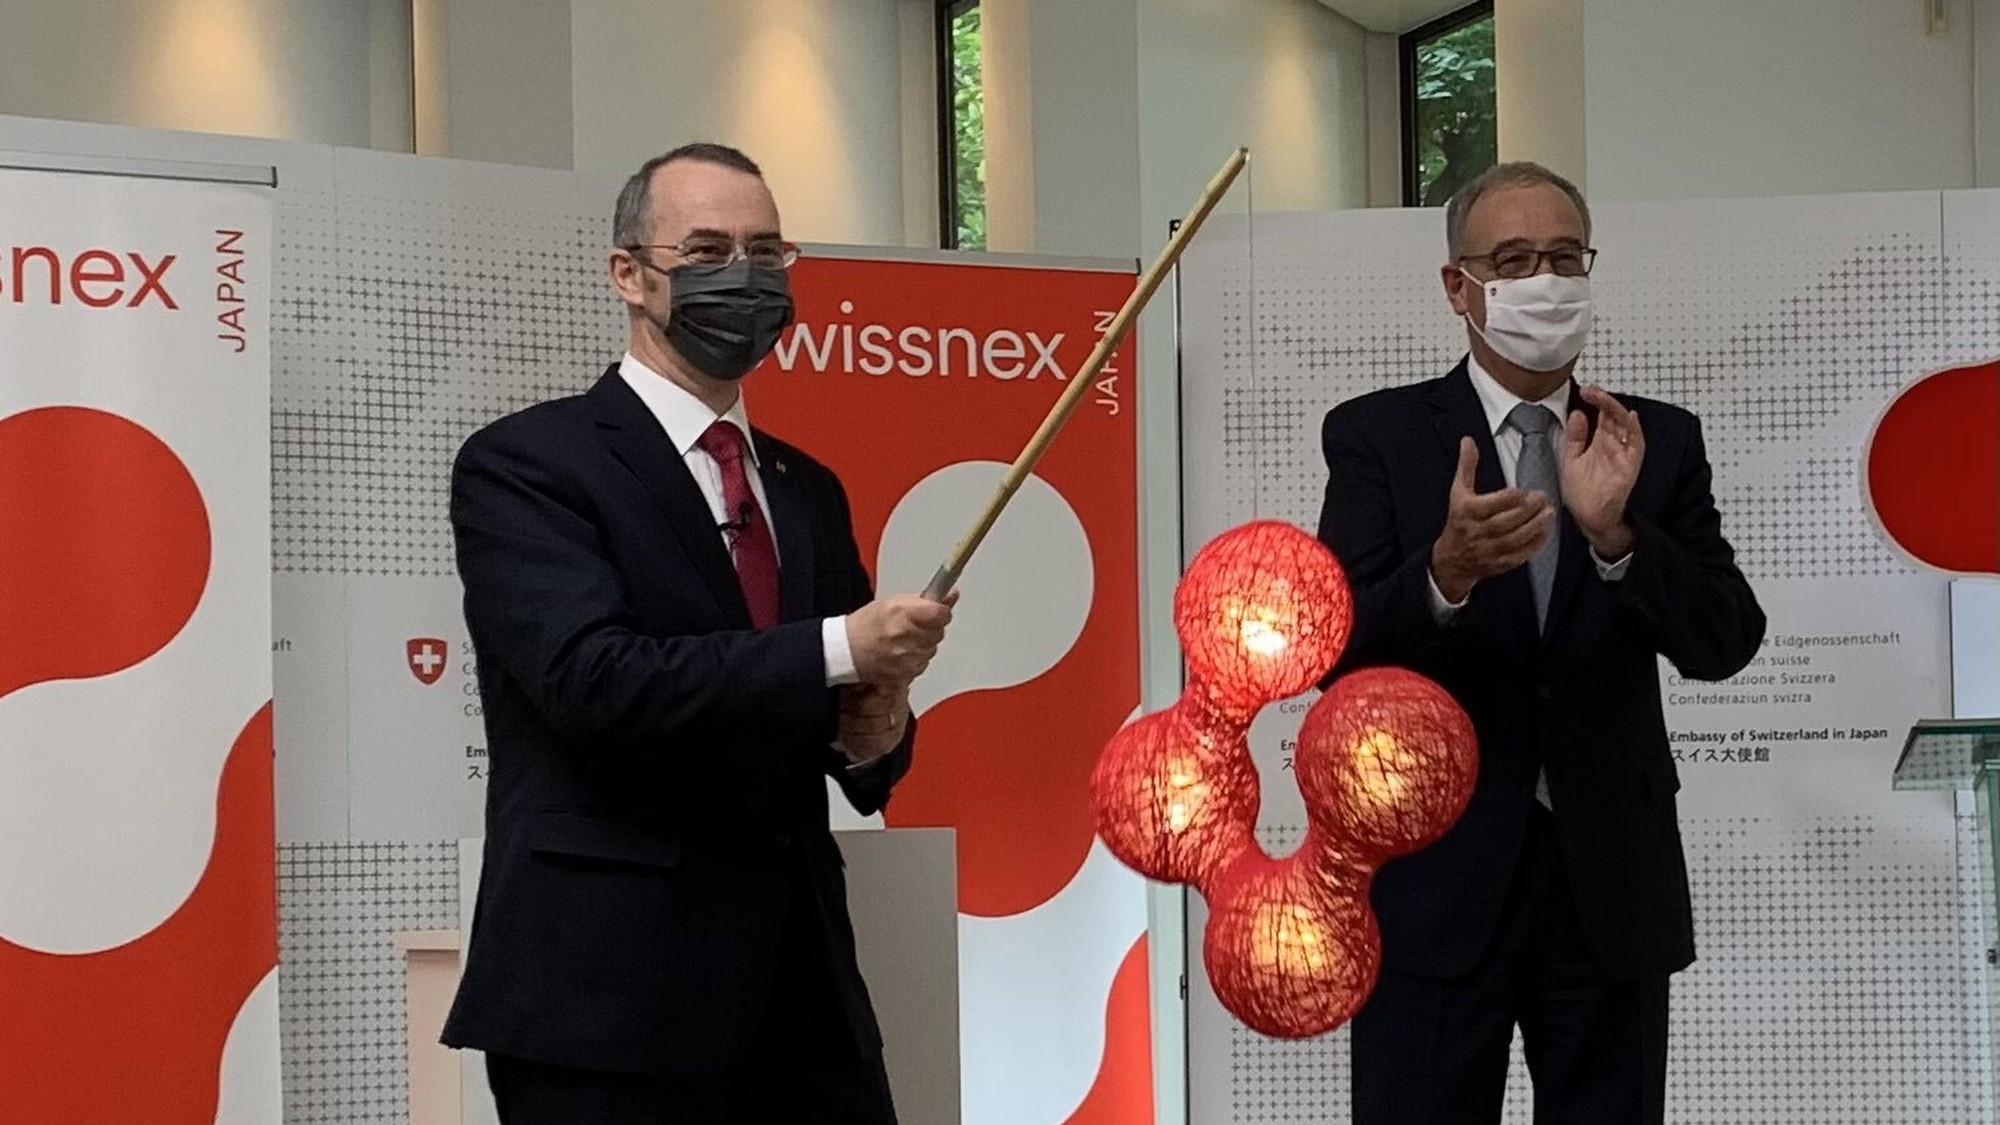 The freshly appointed Consul and CEO Swissnex, Dr. Felix Moesner and the President of Switzerland, Mr. Guy Parmelin at the announcement of the new Swissnex location in Osaka. Source: Twitter ParmelinG